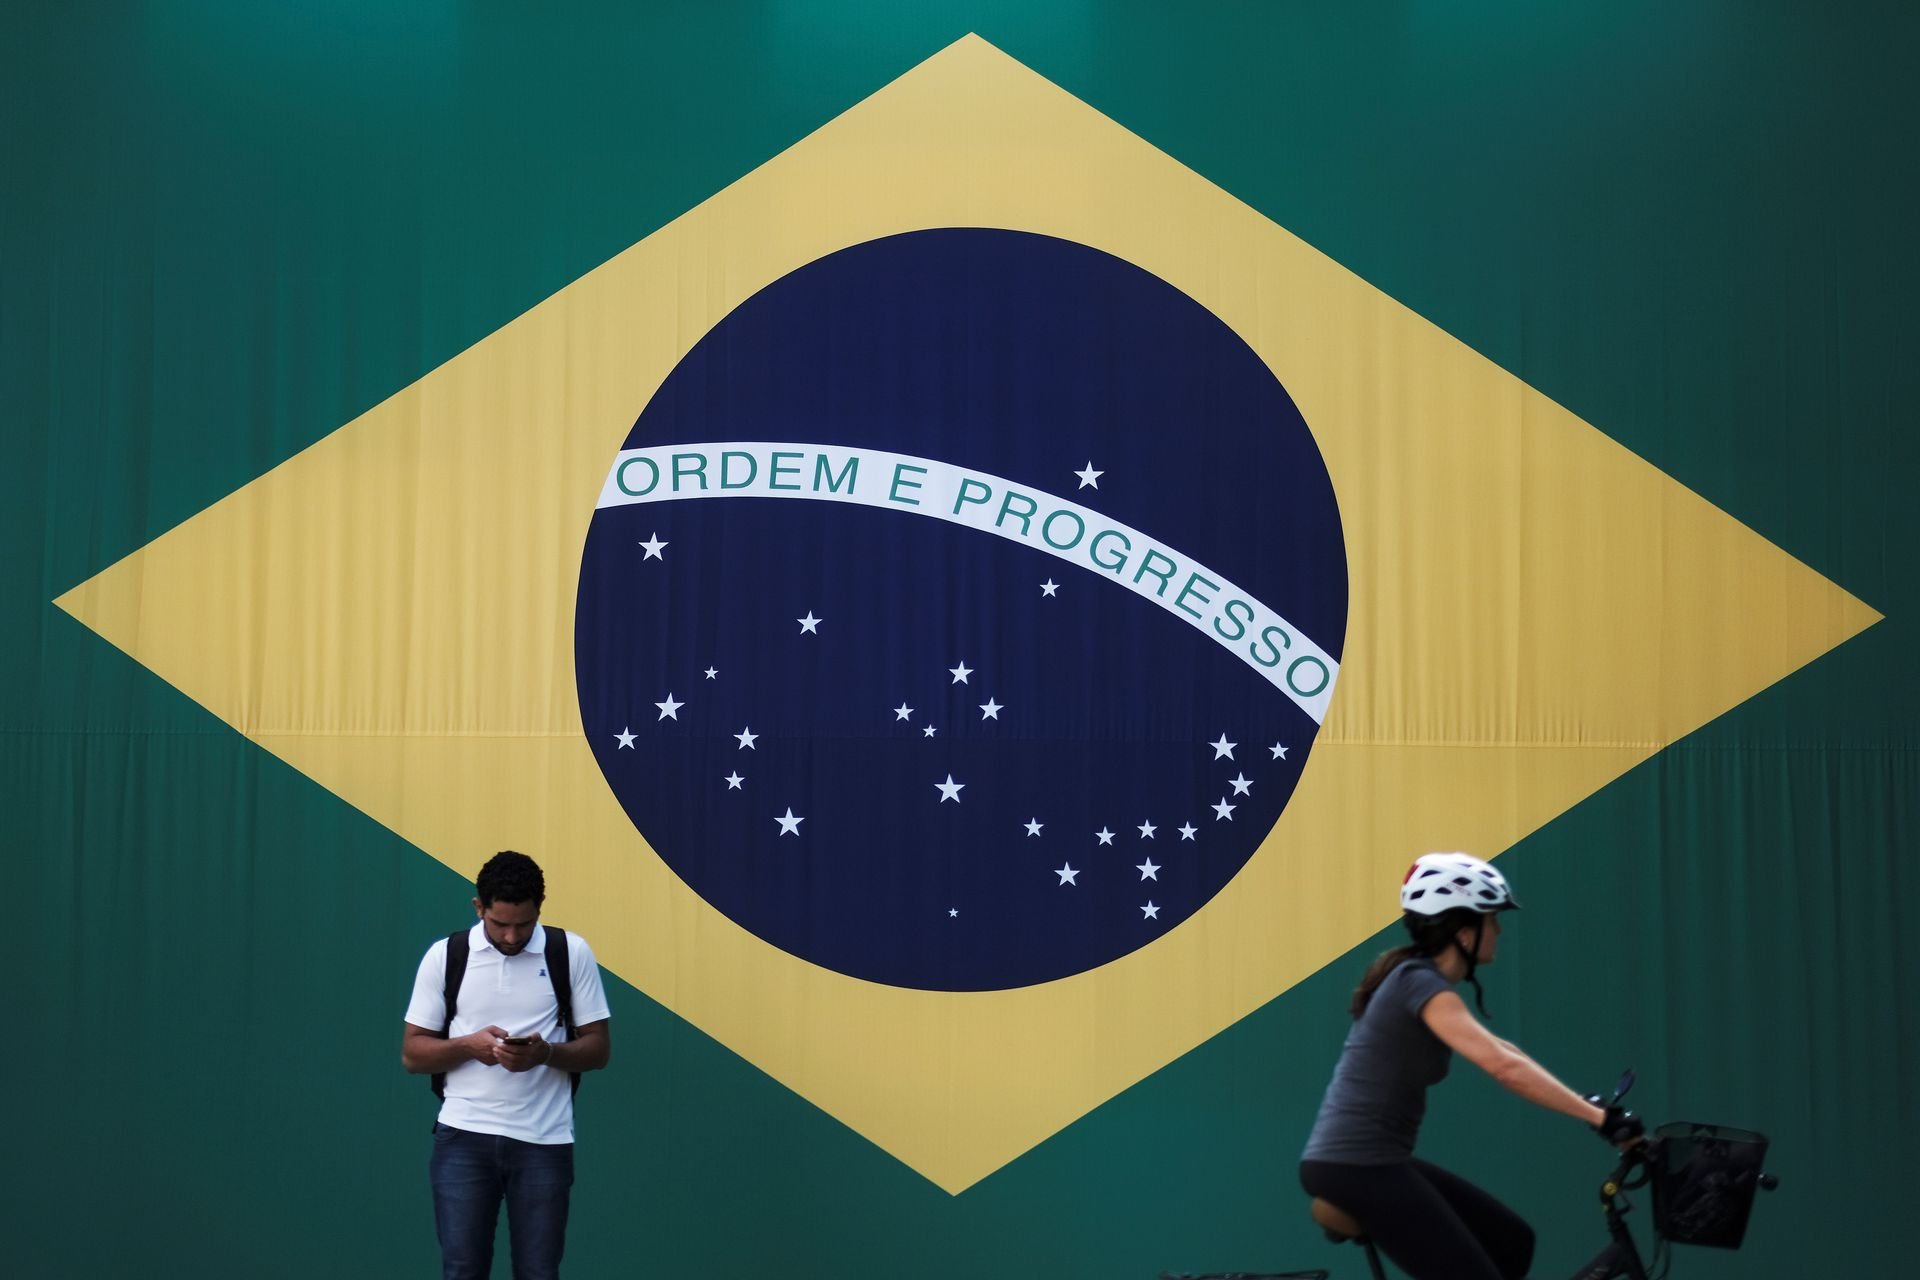 Stable projections for the Brazilian economy